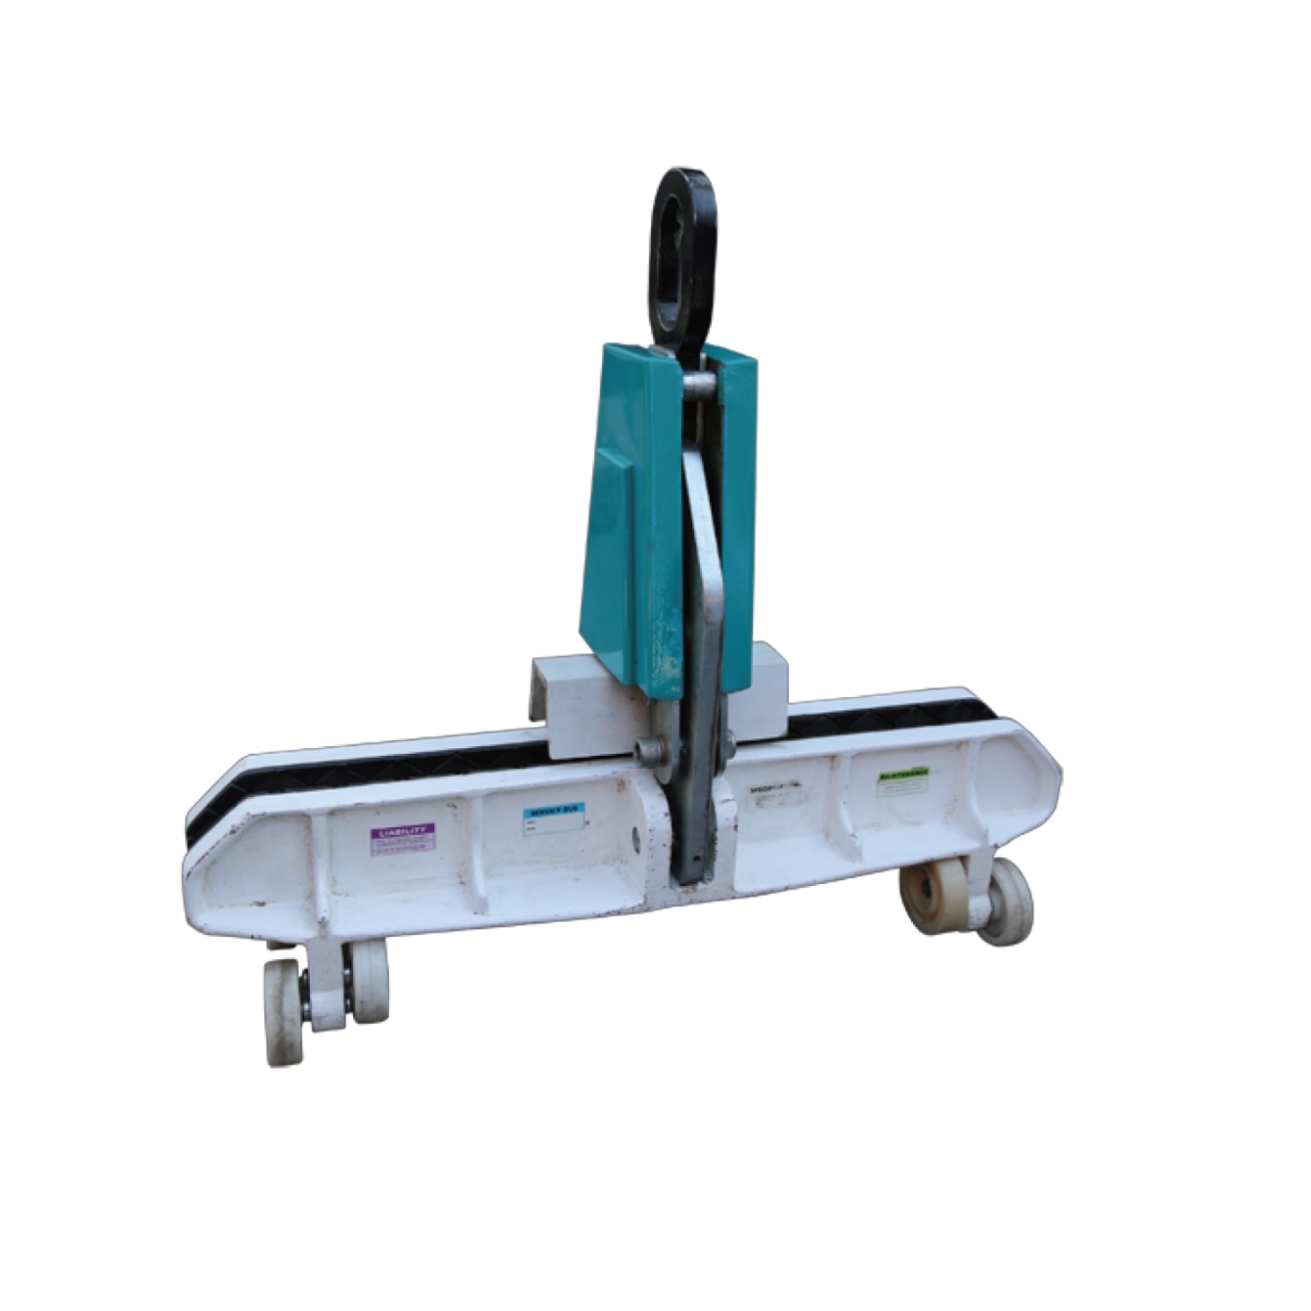 Glass Lifting Clamps Help Move Large Glass Panels (LC Clamp)